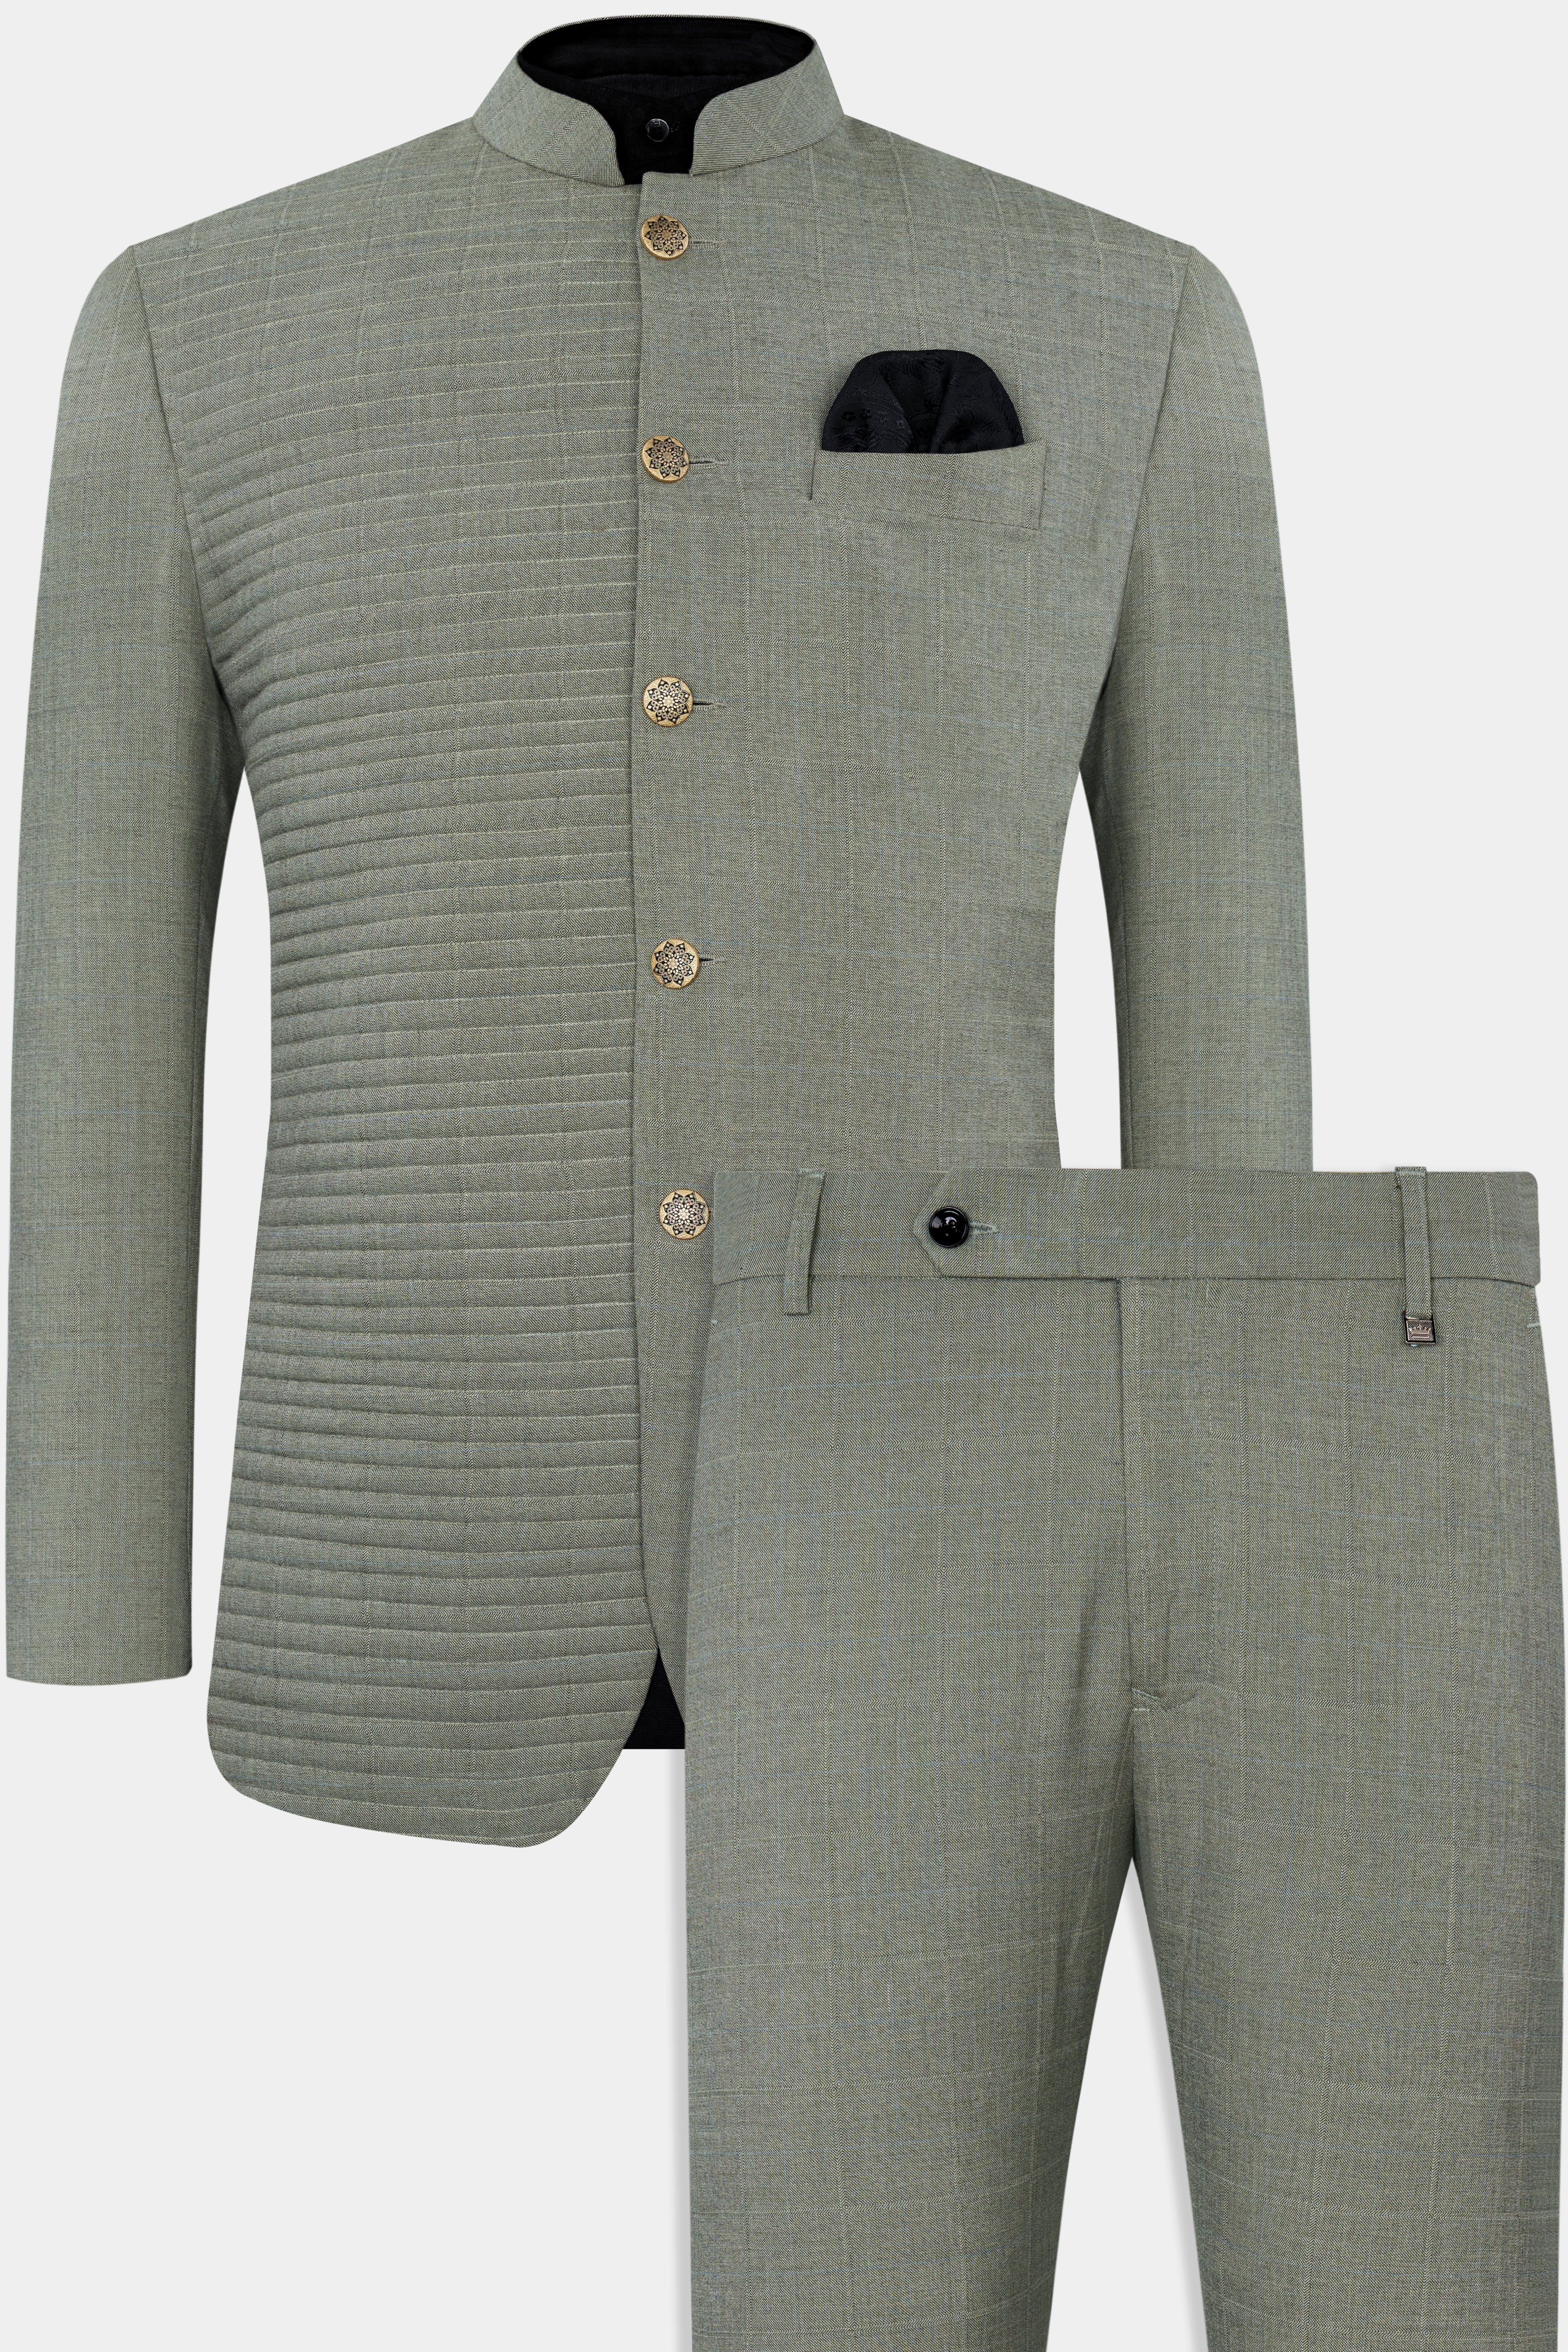 Davys Gray with Horizontal Stitches Wool Rich Designer Bandhgala Stretchable traveler Suit ST2813-BG-D168-36, ST2813-BG-D168-38, ST2813-BG-D168-40, ST2813-BG-D168-42, ST2813-BG-D168-44, ST2813-BG-D168-46, ST2813-BG-D168-48, ST2813-BG-D168-50, ST2813-BG-D168-52, ST2813-BG-D168-54, ST2813-BG-D168-56, ST2813-BG-D168-58, ST2813-BG-D168-60